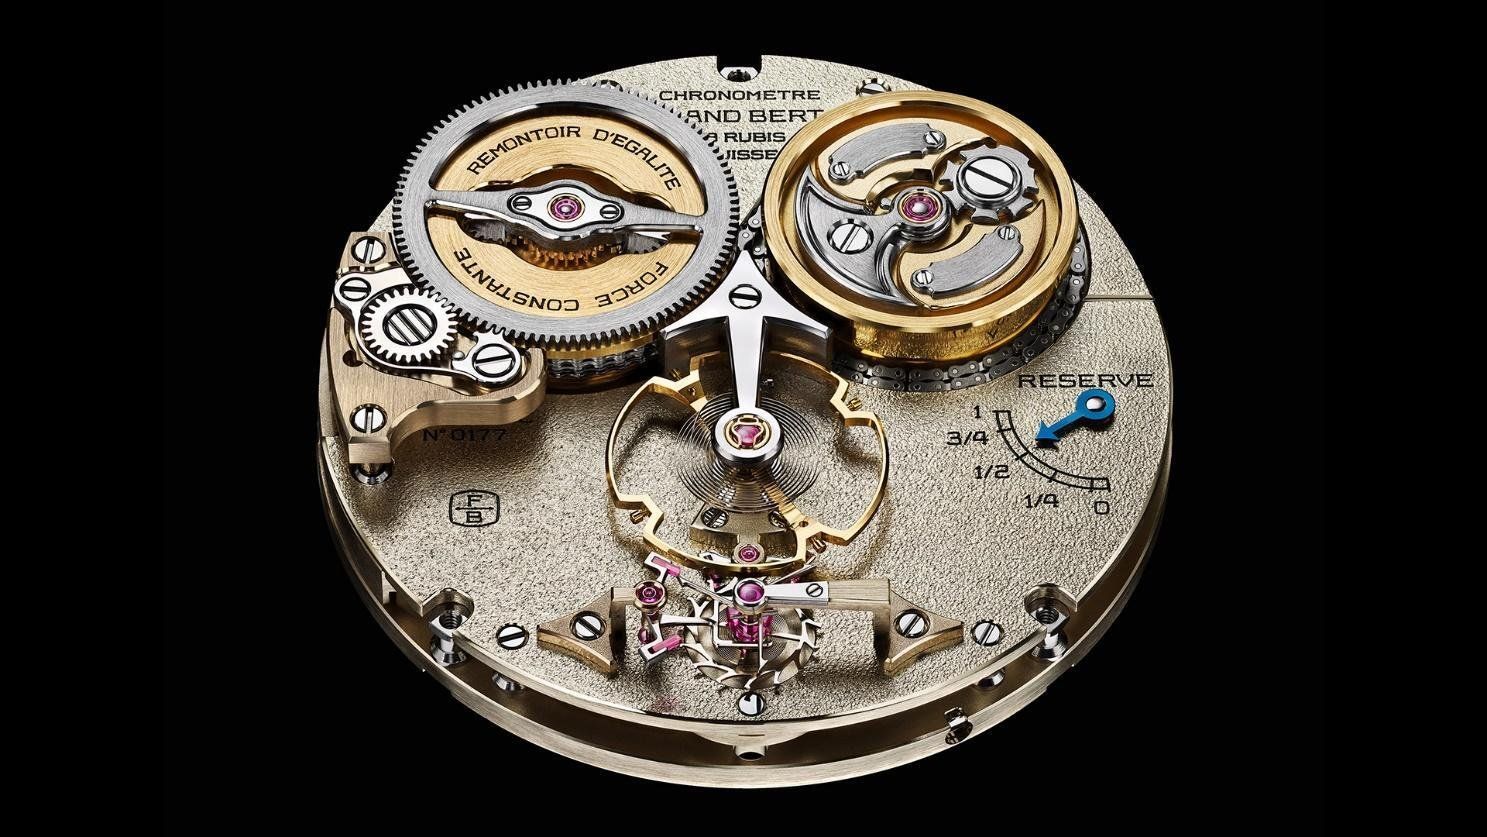 A fusee-and-chain transmission serving constant force for escapement on the Ferdinand Berthoud FB-RE.FC caliber acts like an infinitely variable automatic reduction gearbox for greater chronometry precision, source - Ferdinand Berthoud